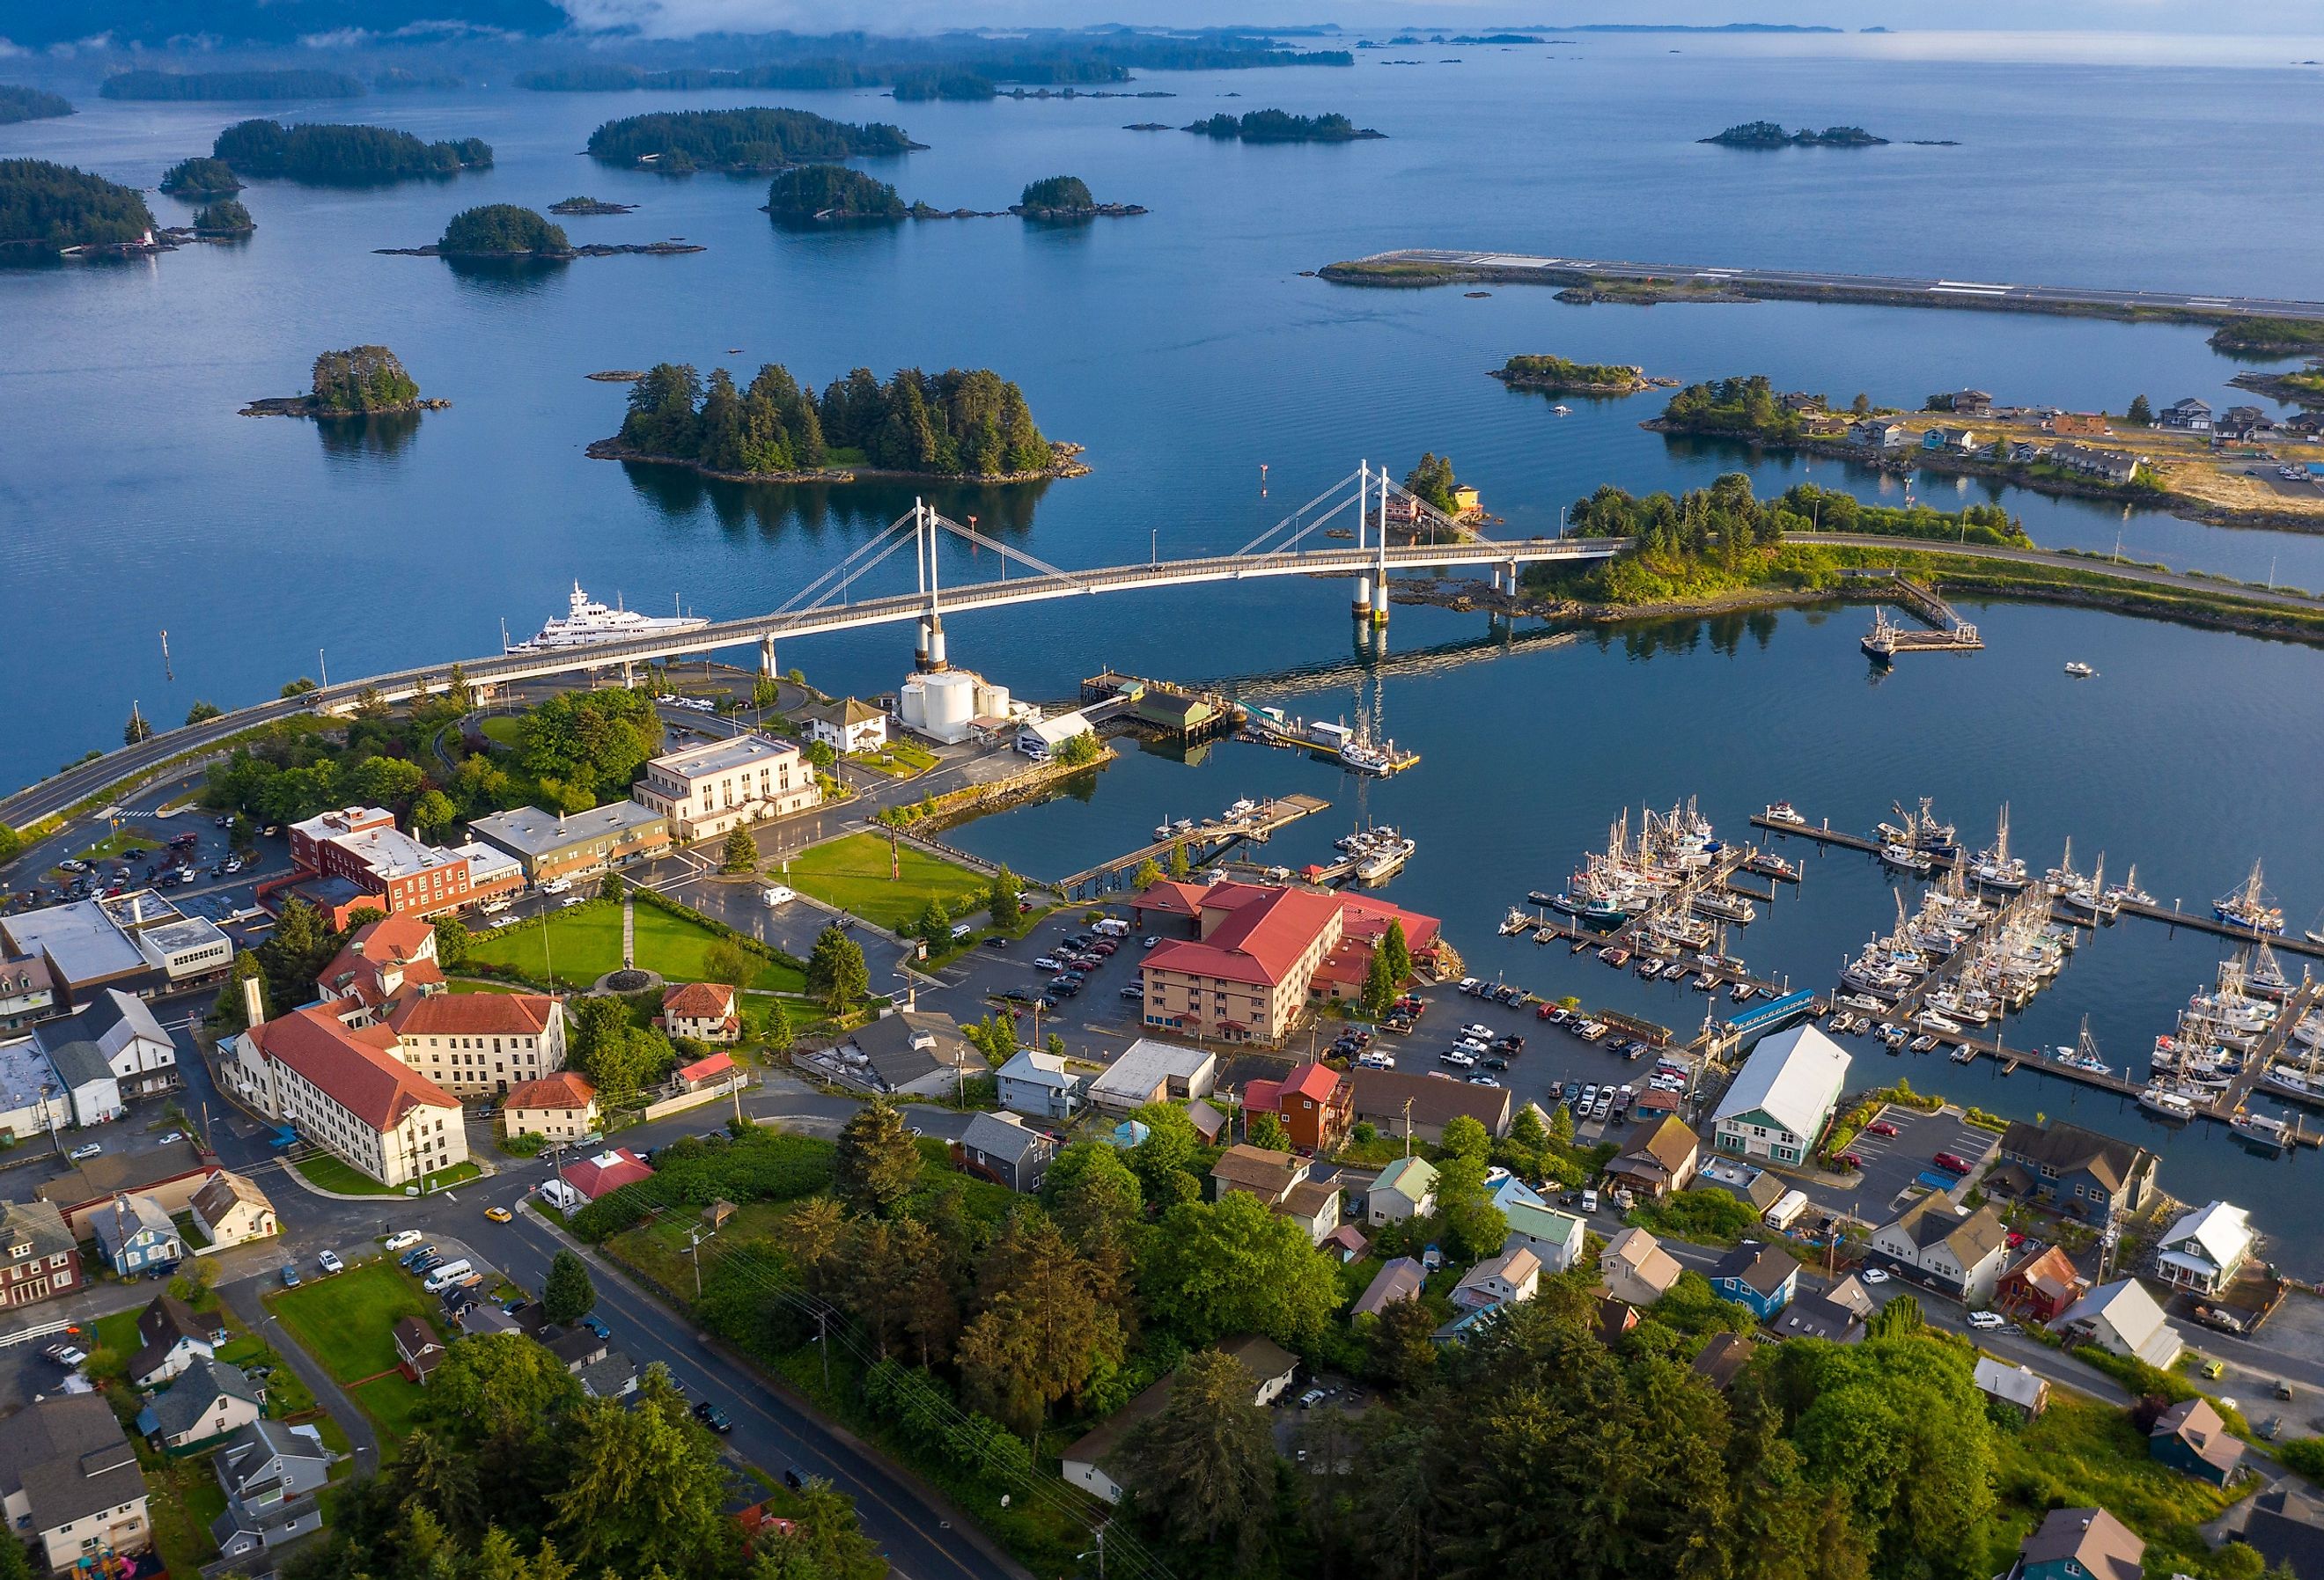 Aerial view of downtown Sitka, Alaska at sunset